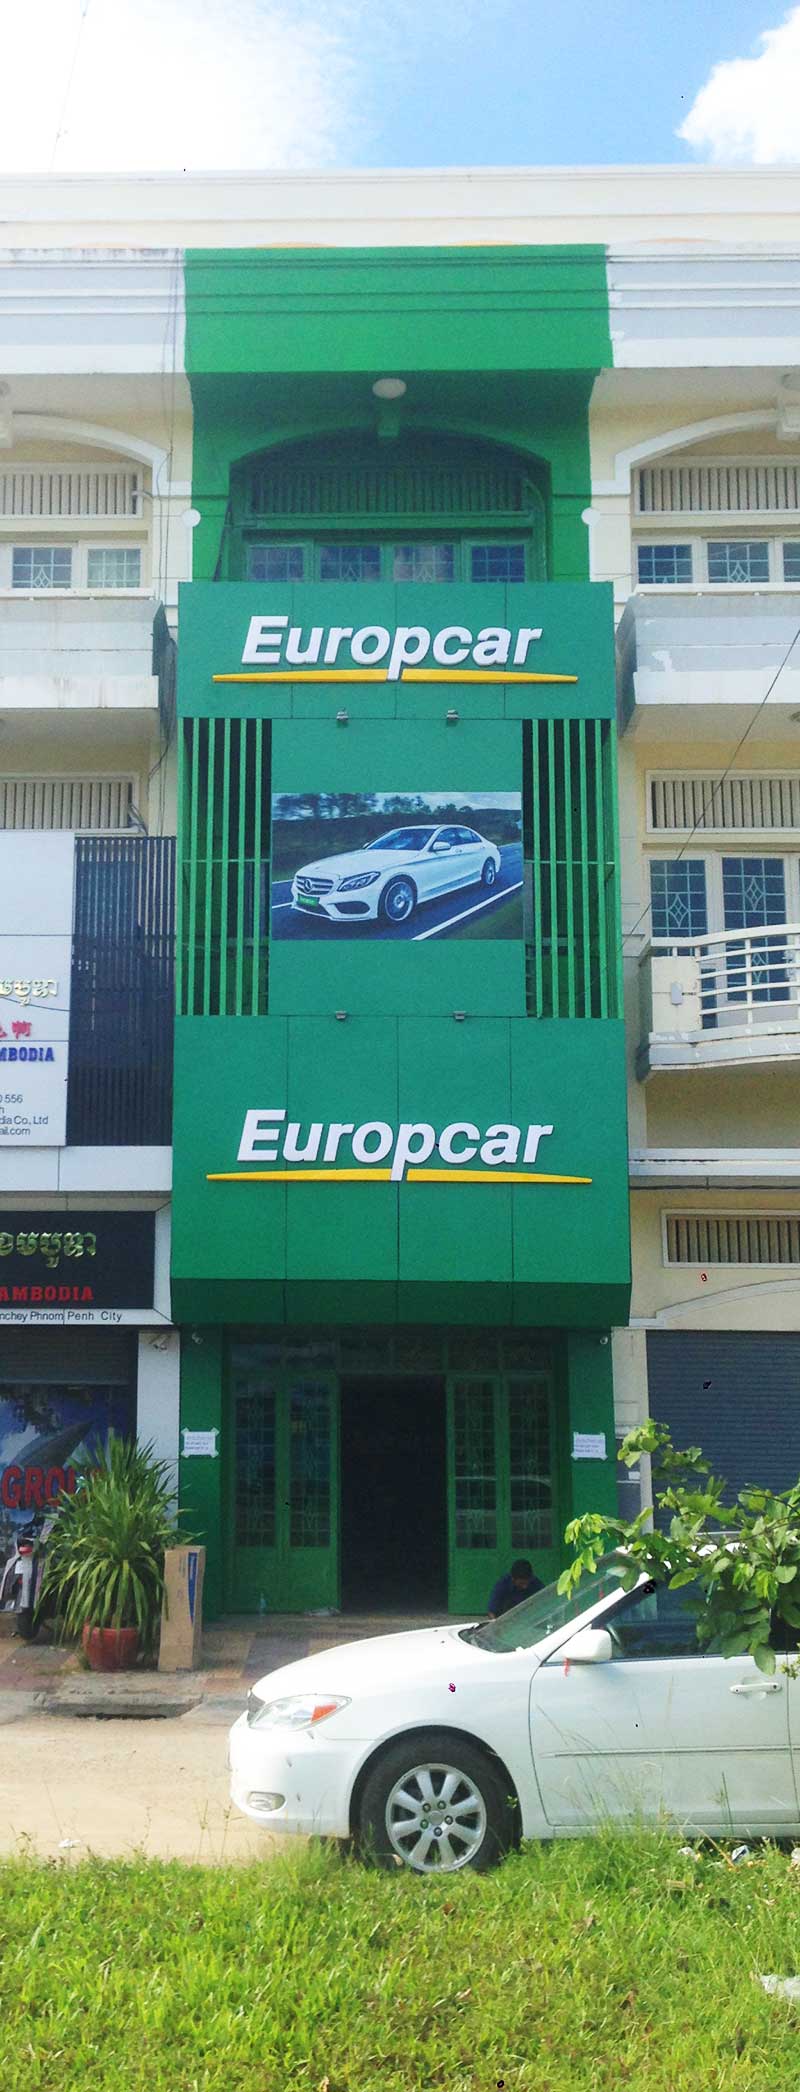 branded-sign-europ-car-by-capital-arts-design (2)